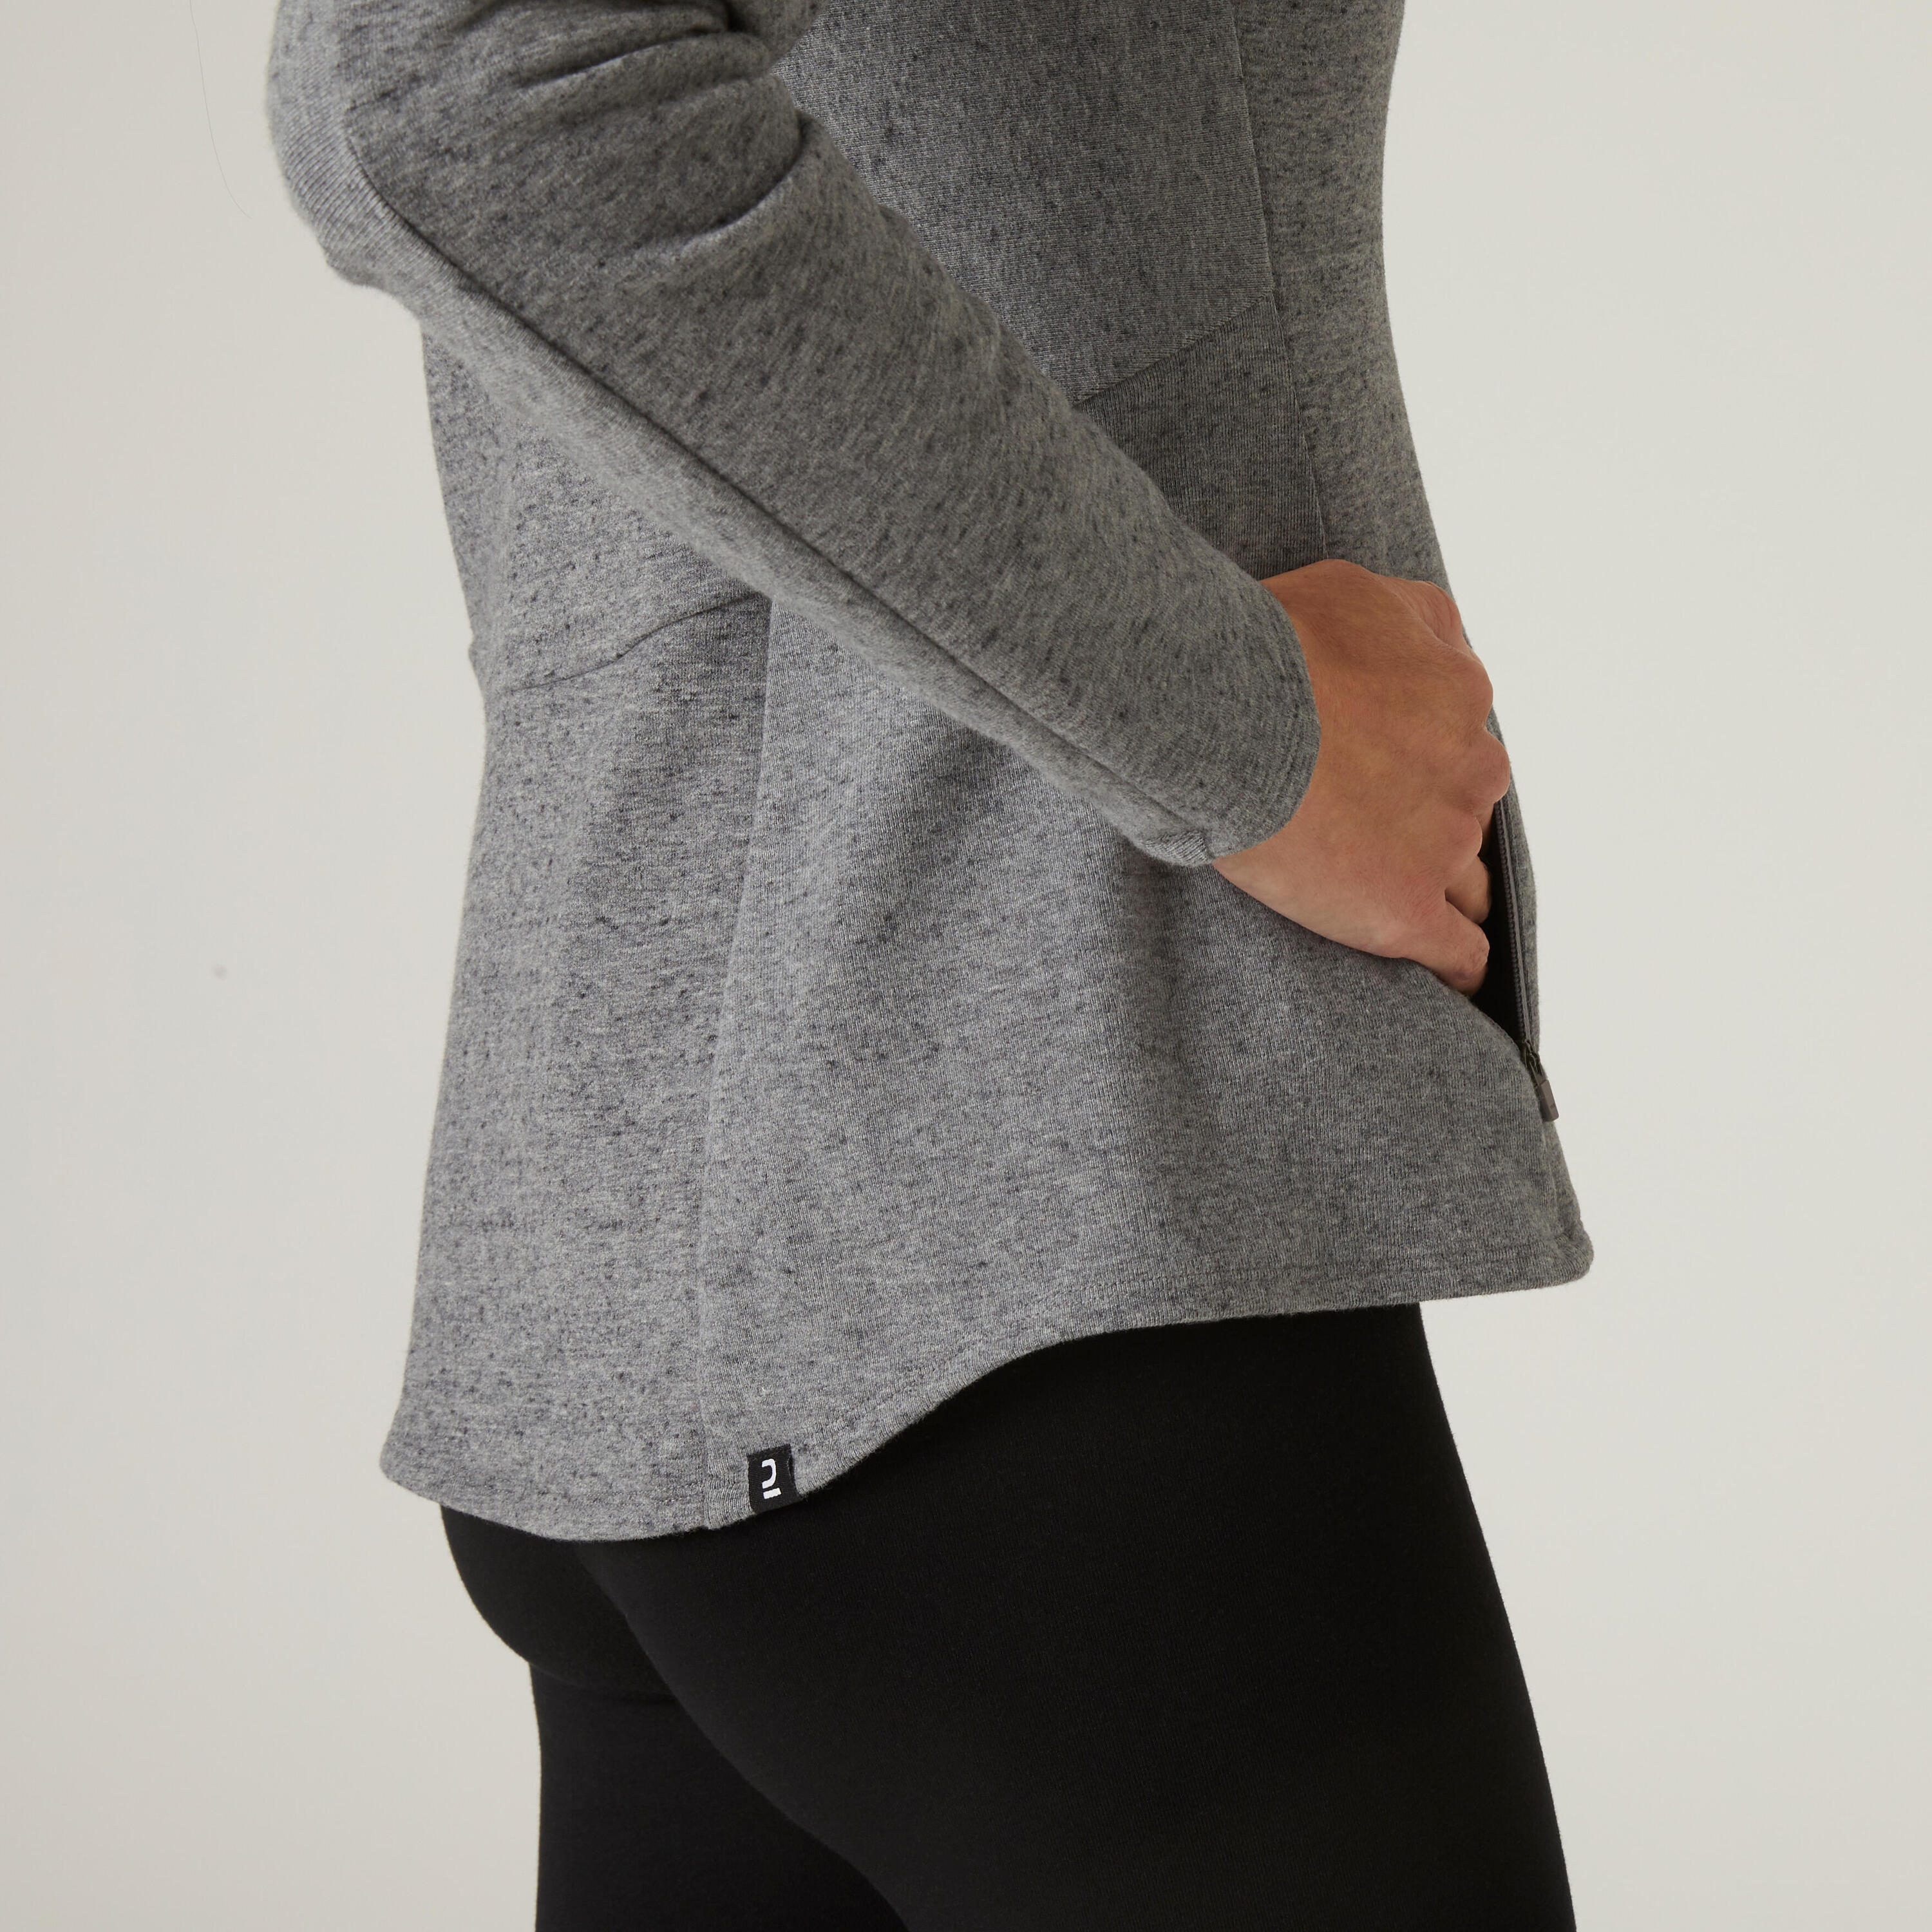 Women's Fitted High Neck Zipped Sweatshirt With Pocket 520 - Grey 6/7